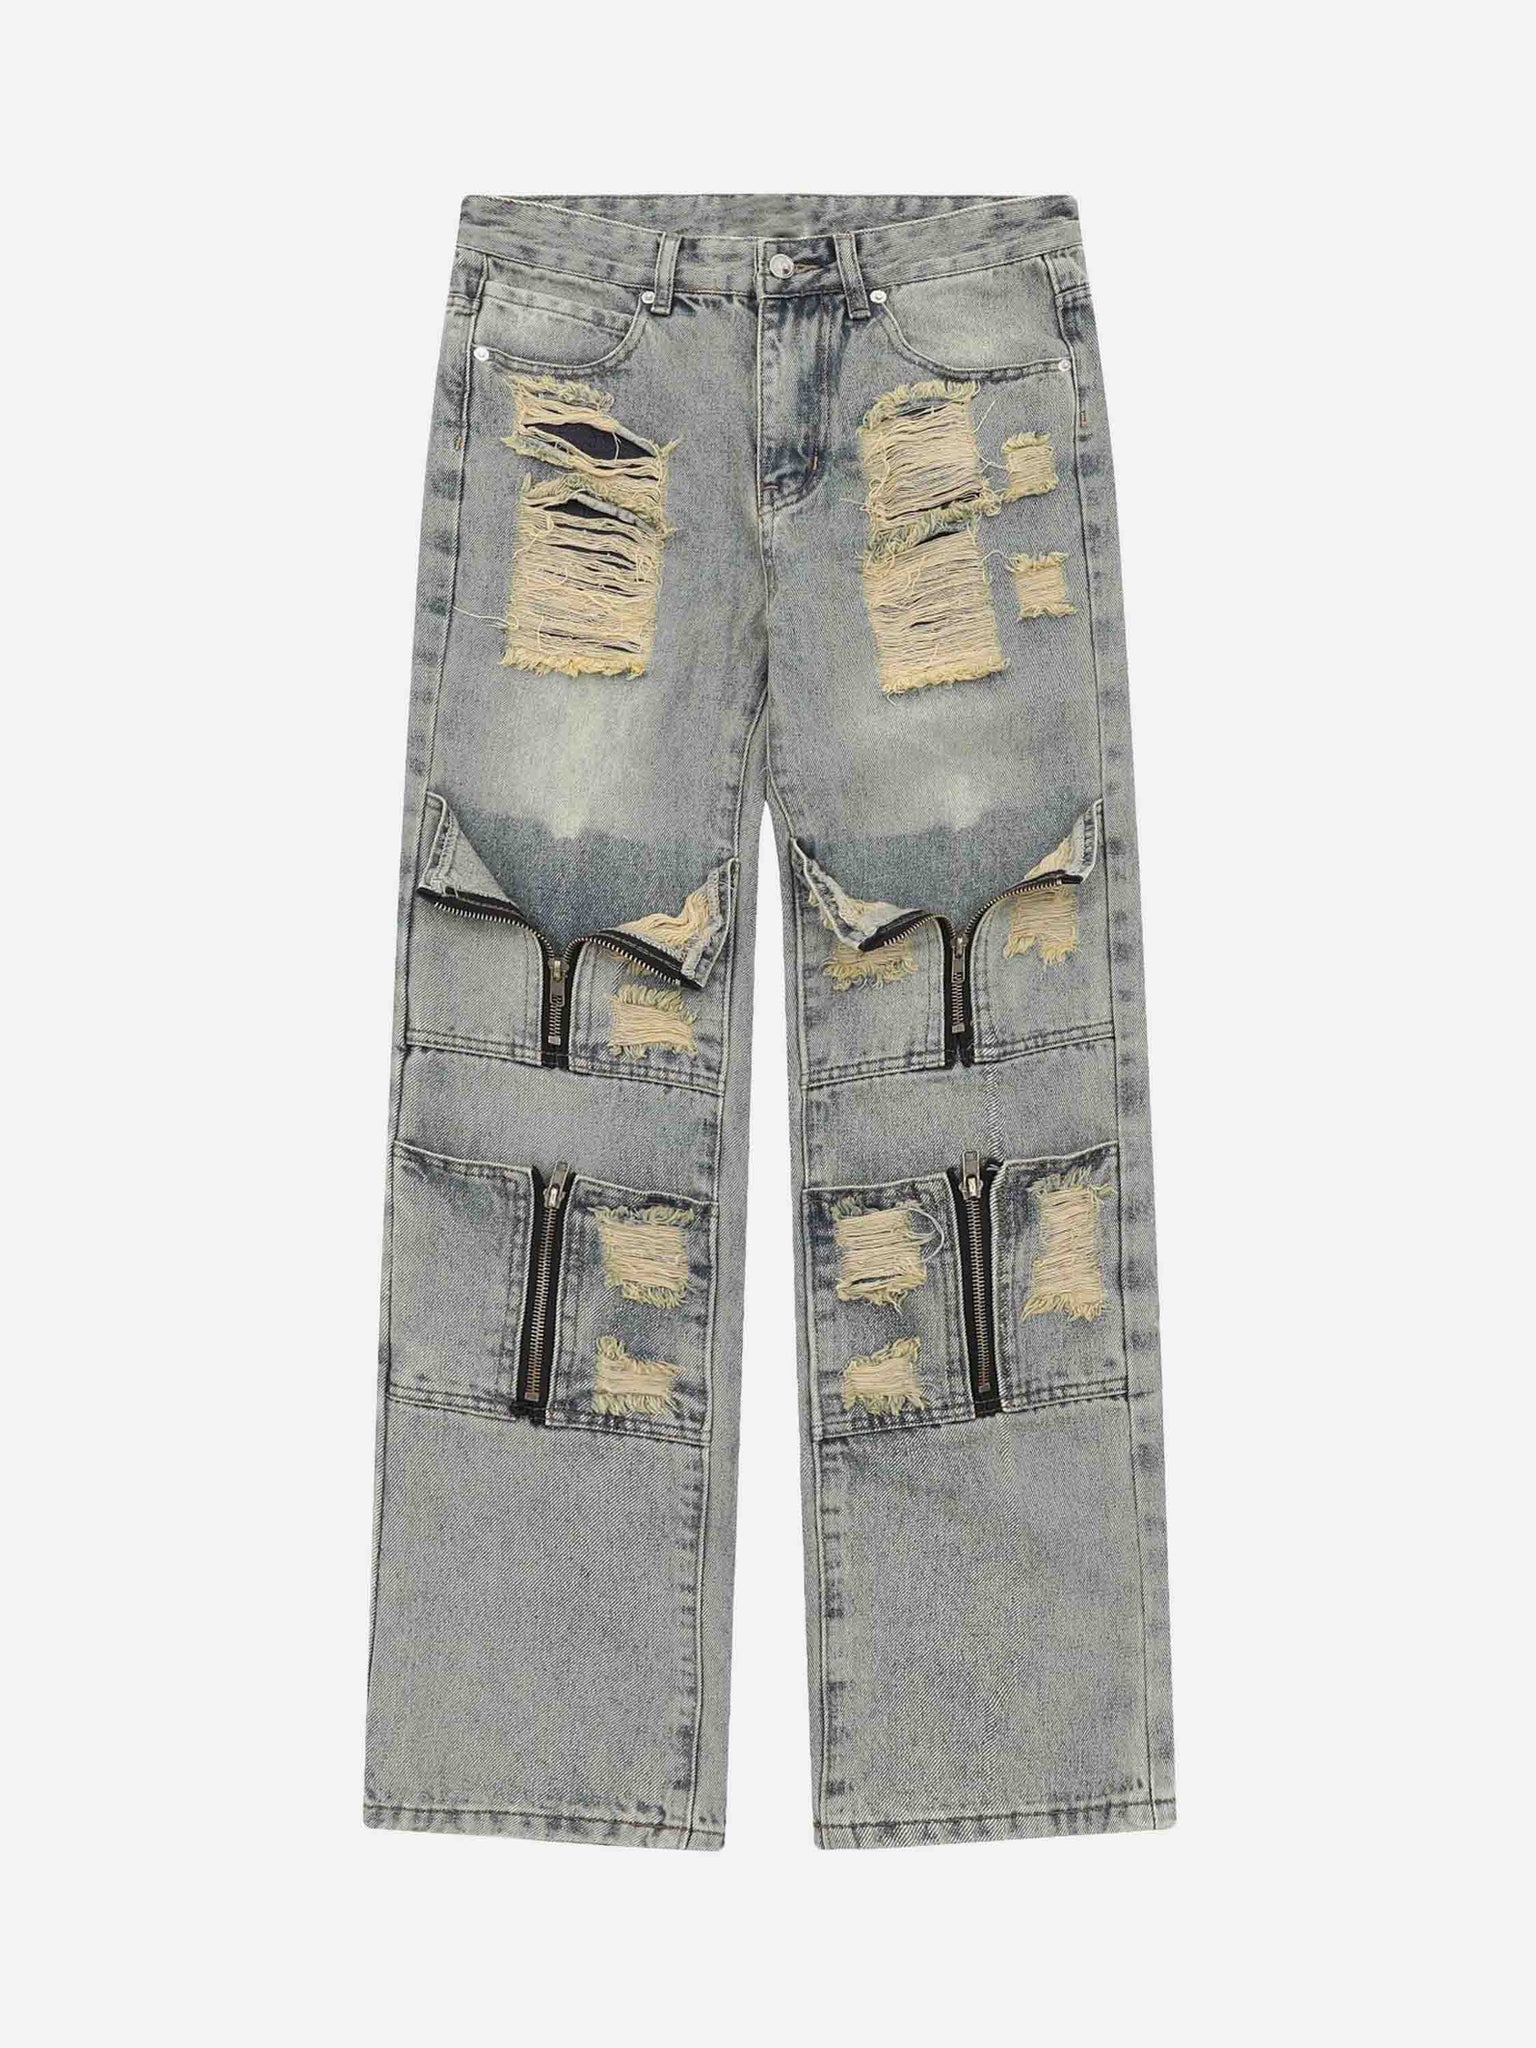 Thesupermade American High Street Washed And Torn Work Pockets Straight Denim Pants - 1646